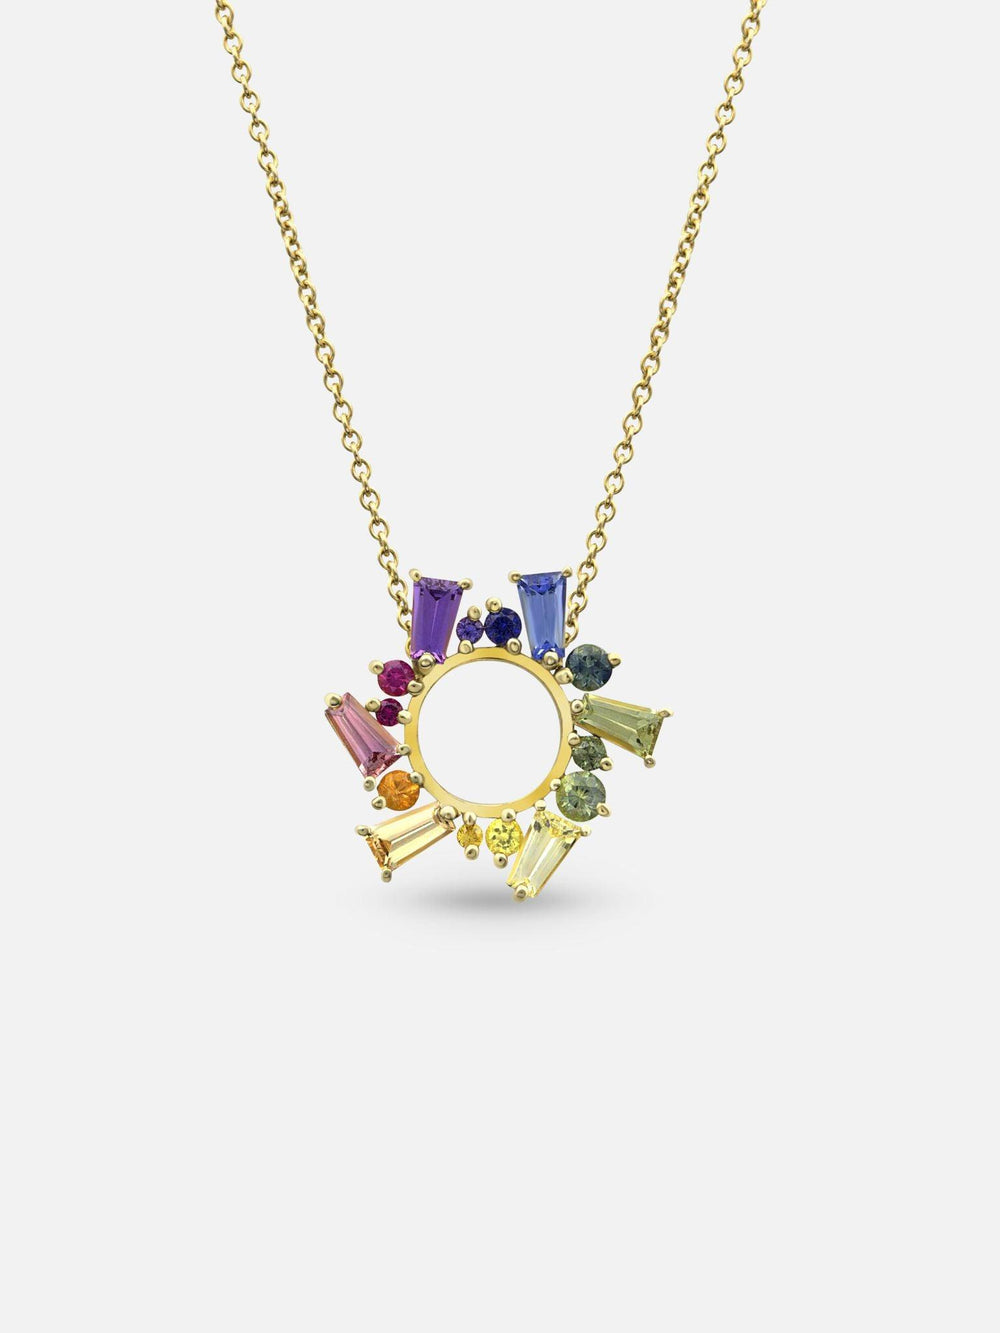 Rainbow Sapphire Small Open Circle Necklace - Meredith Young - At Present